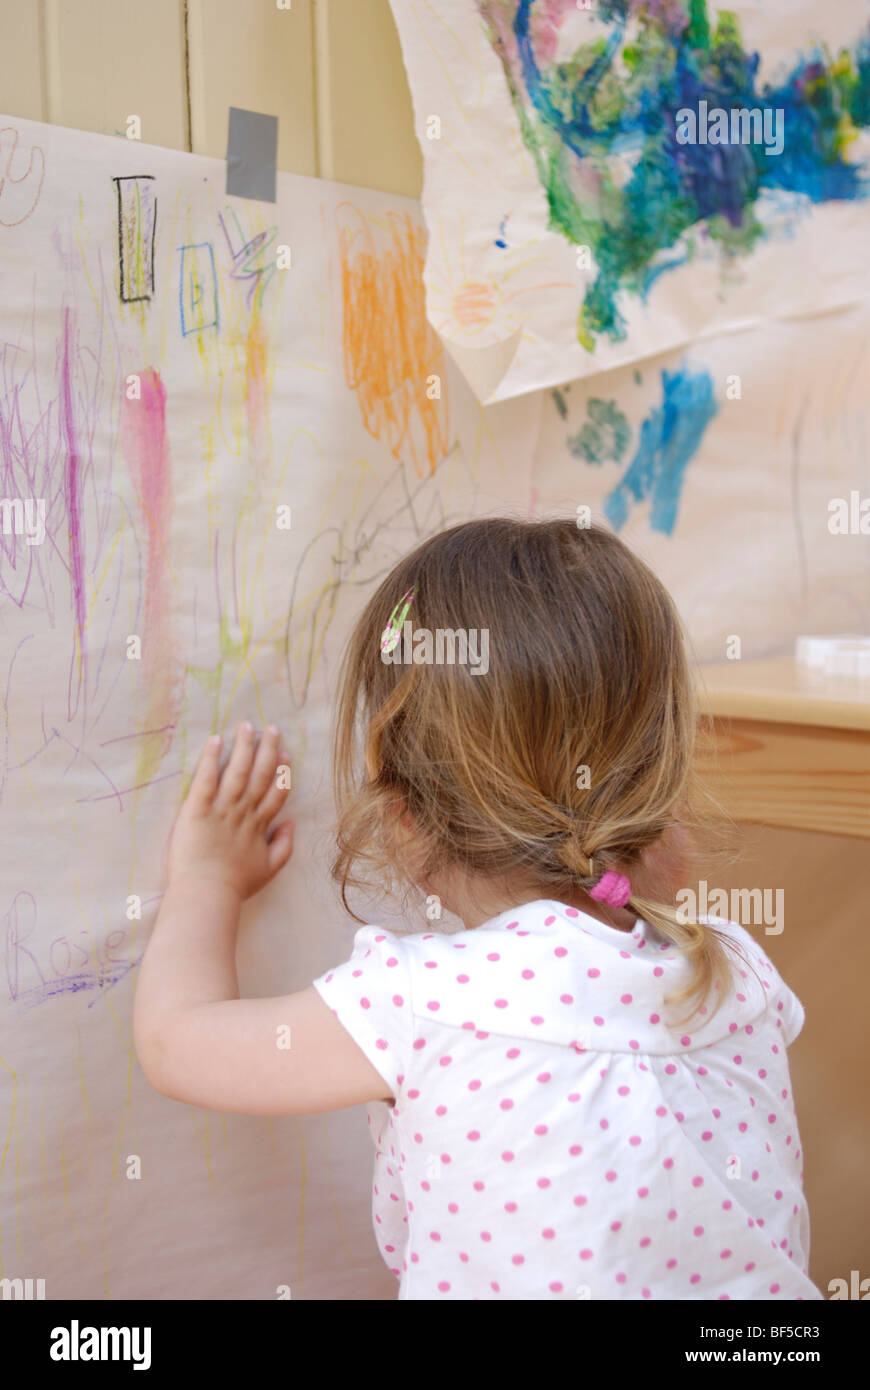 Young girl, three years old, drawing with crayons surrounded by her art. Stock Photo